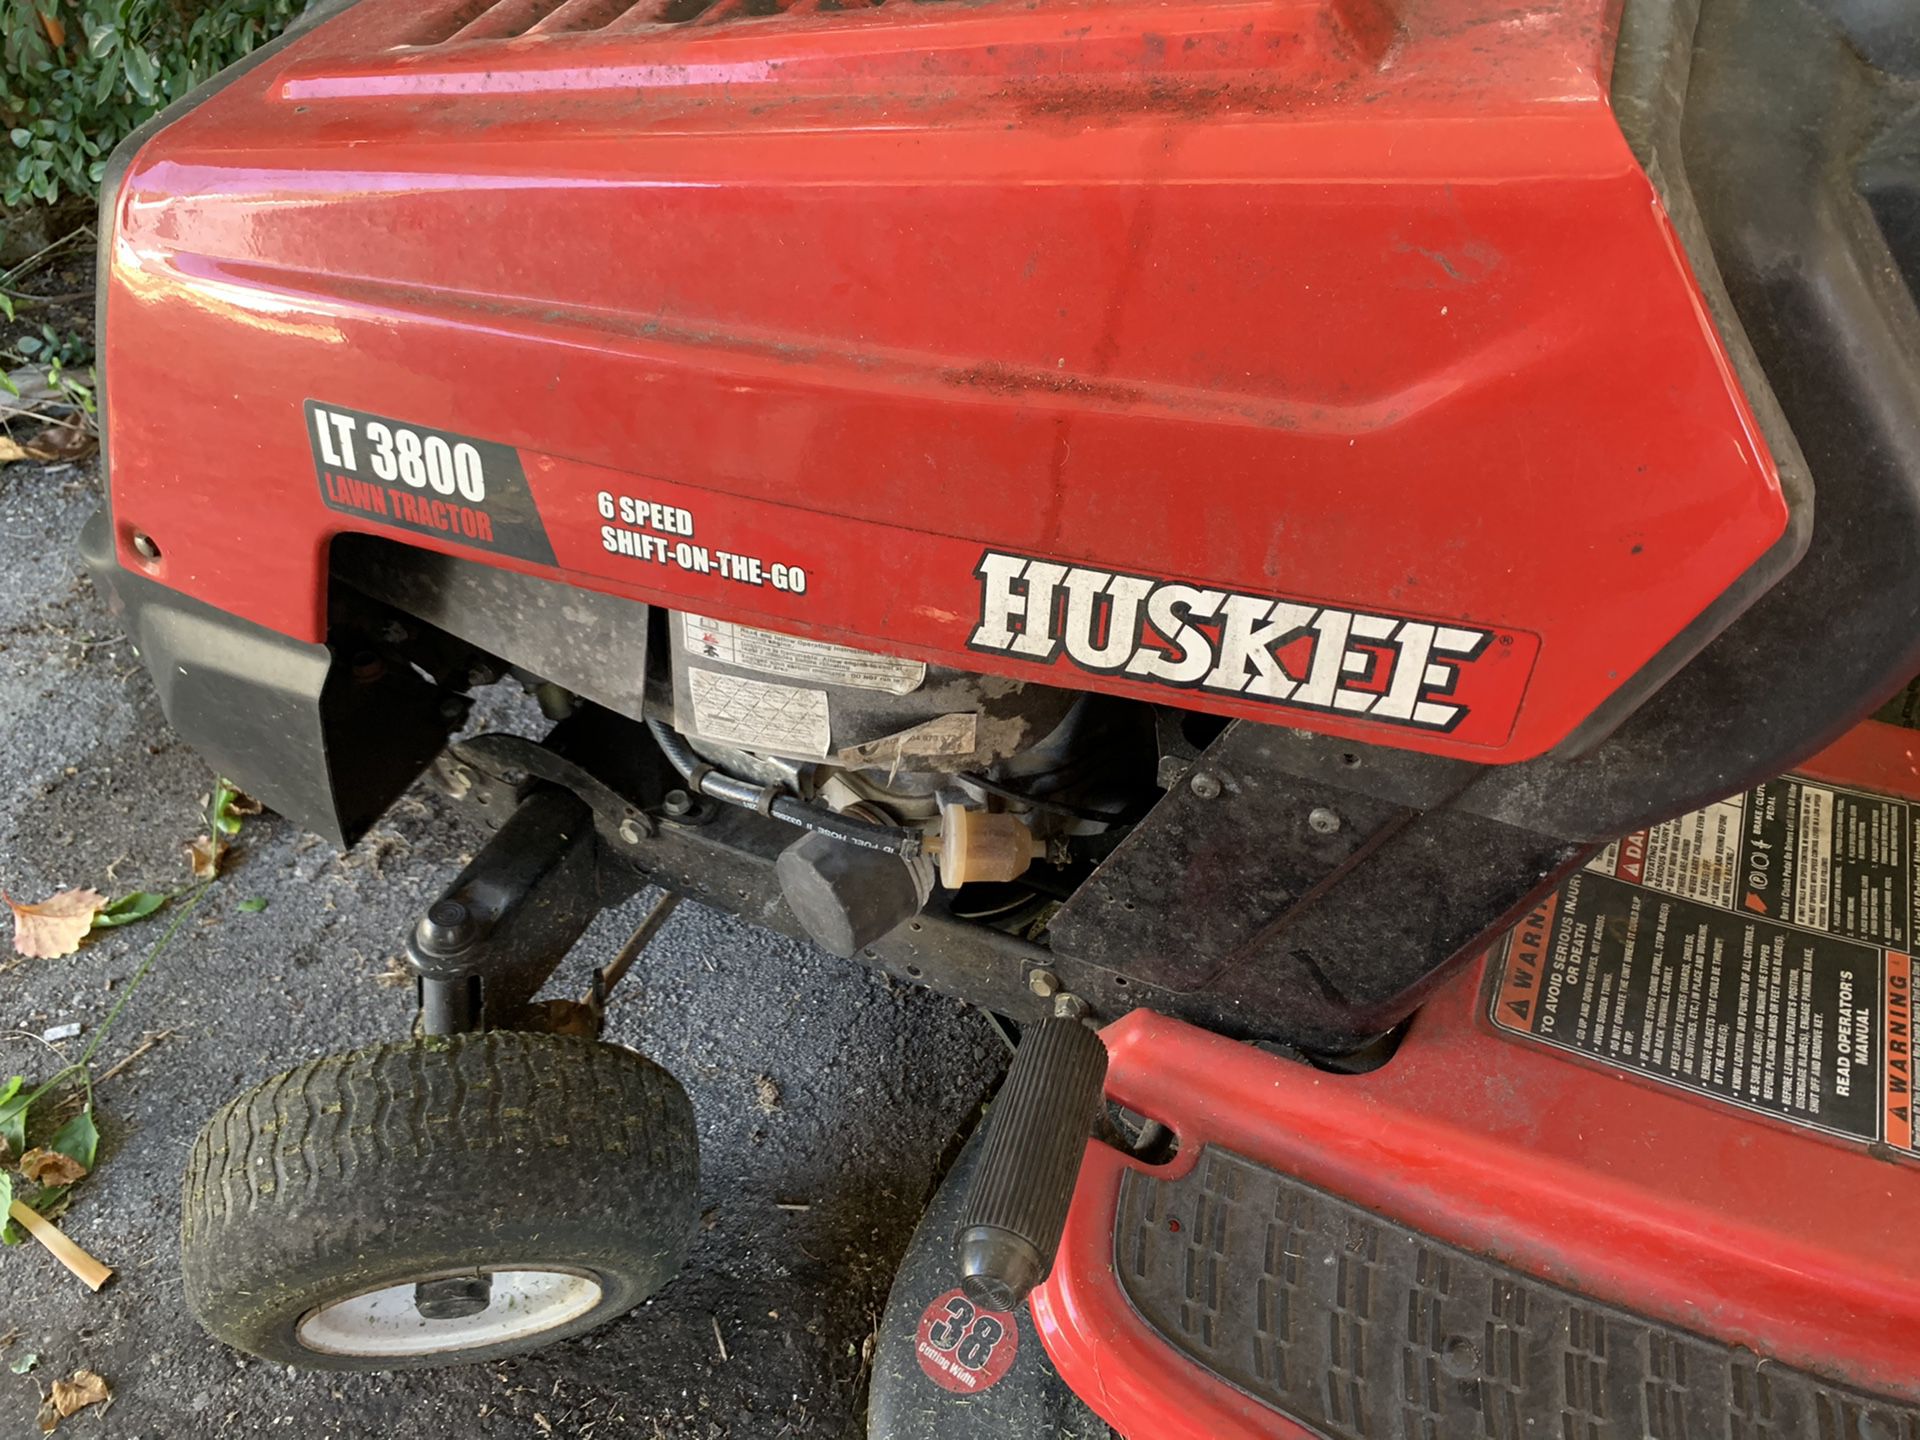 Huskee LT 3800 - Lawn tractor